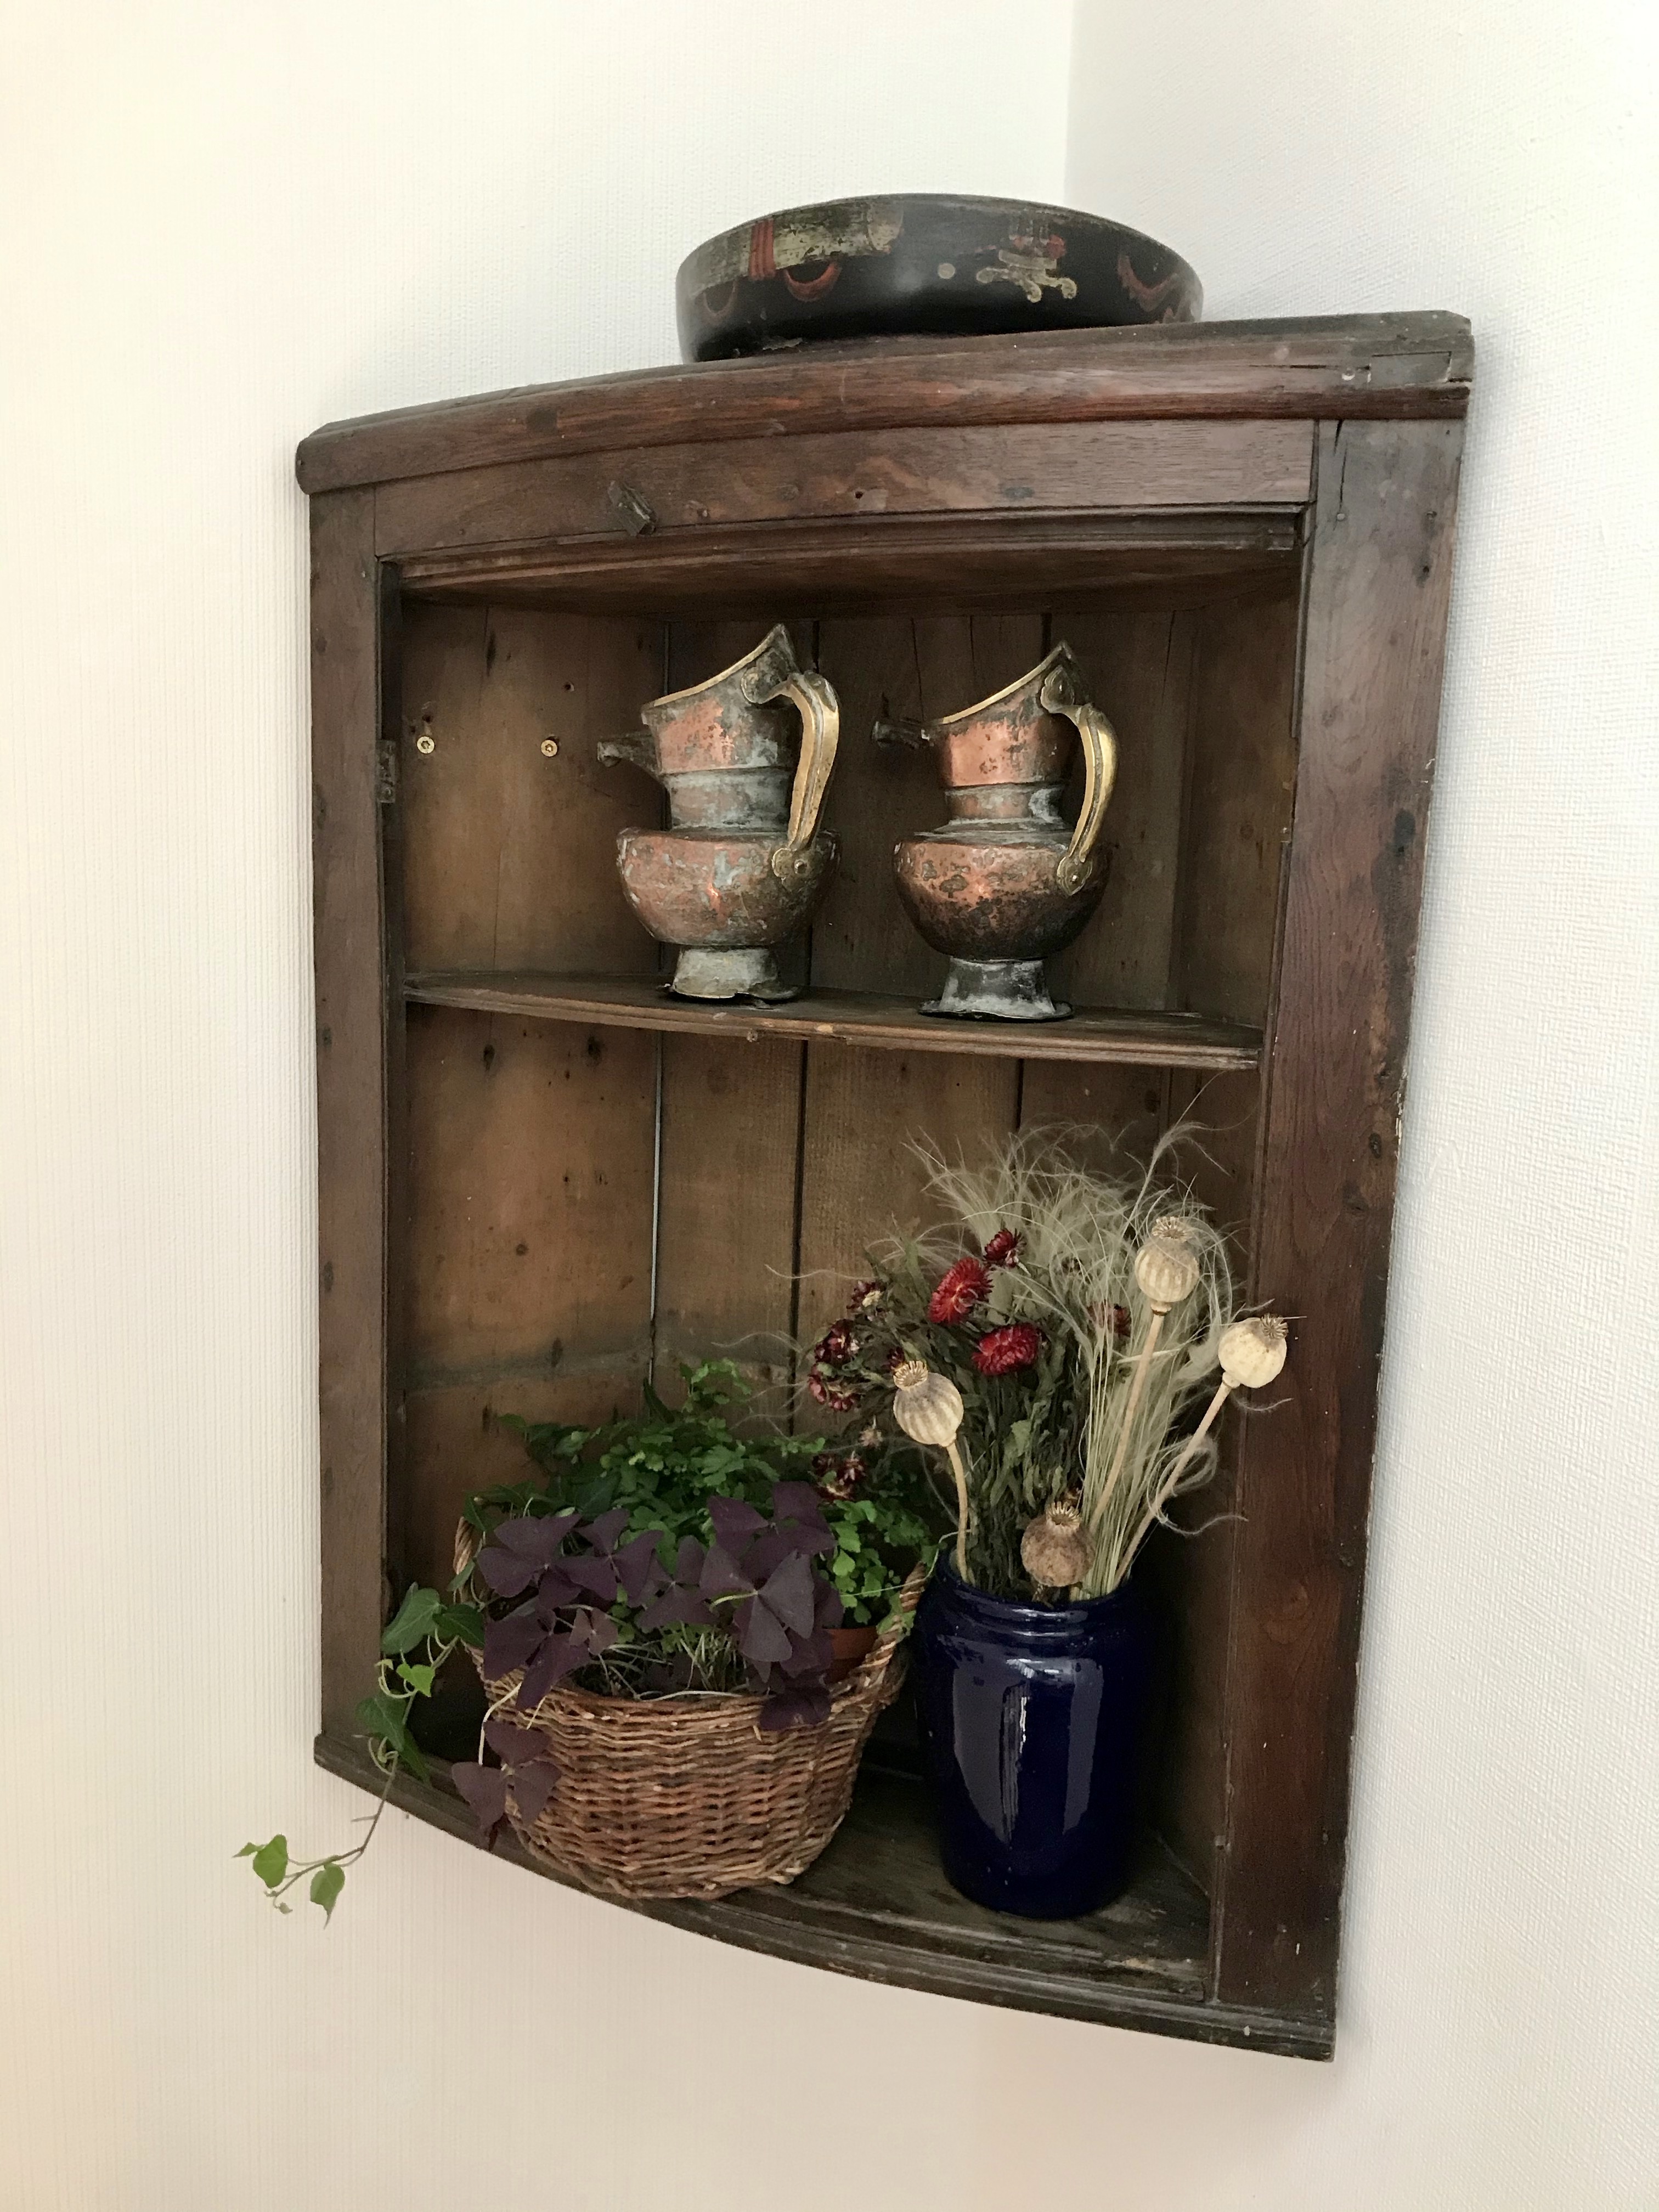 Corner shelf with plant and ornaments